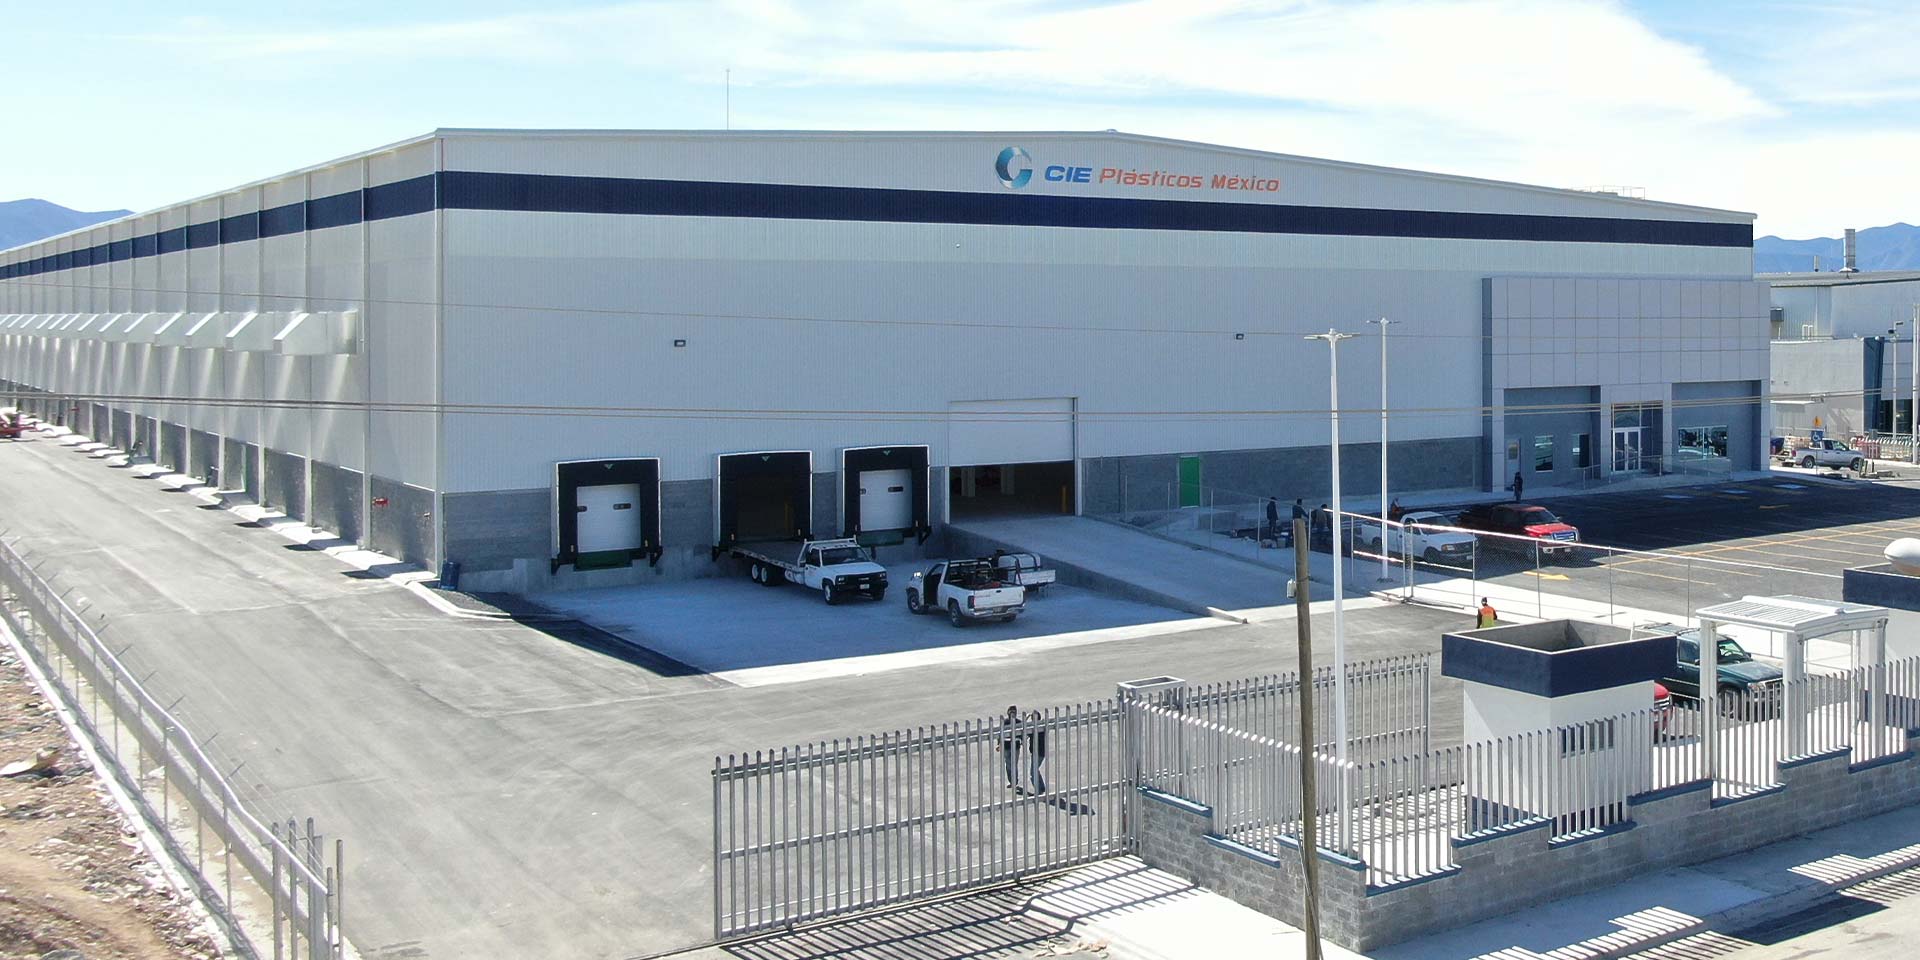 Drone photograph of a DAVISA industrial park building operated by CIE Plasticos Mexico